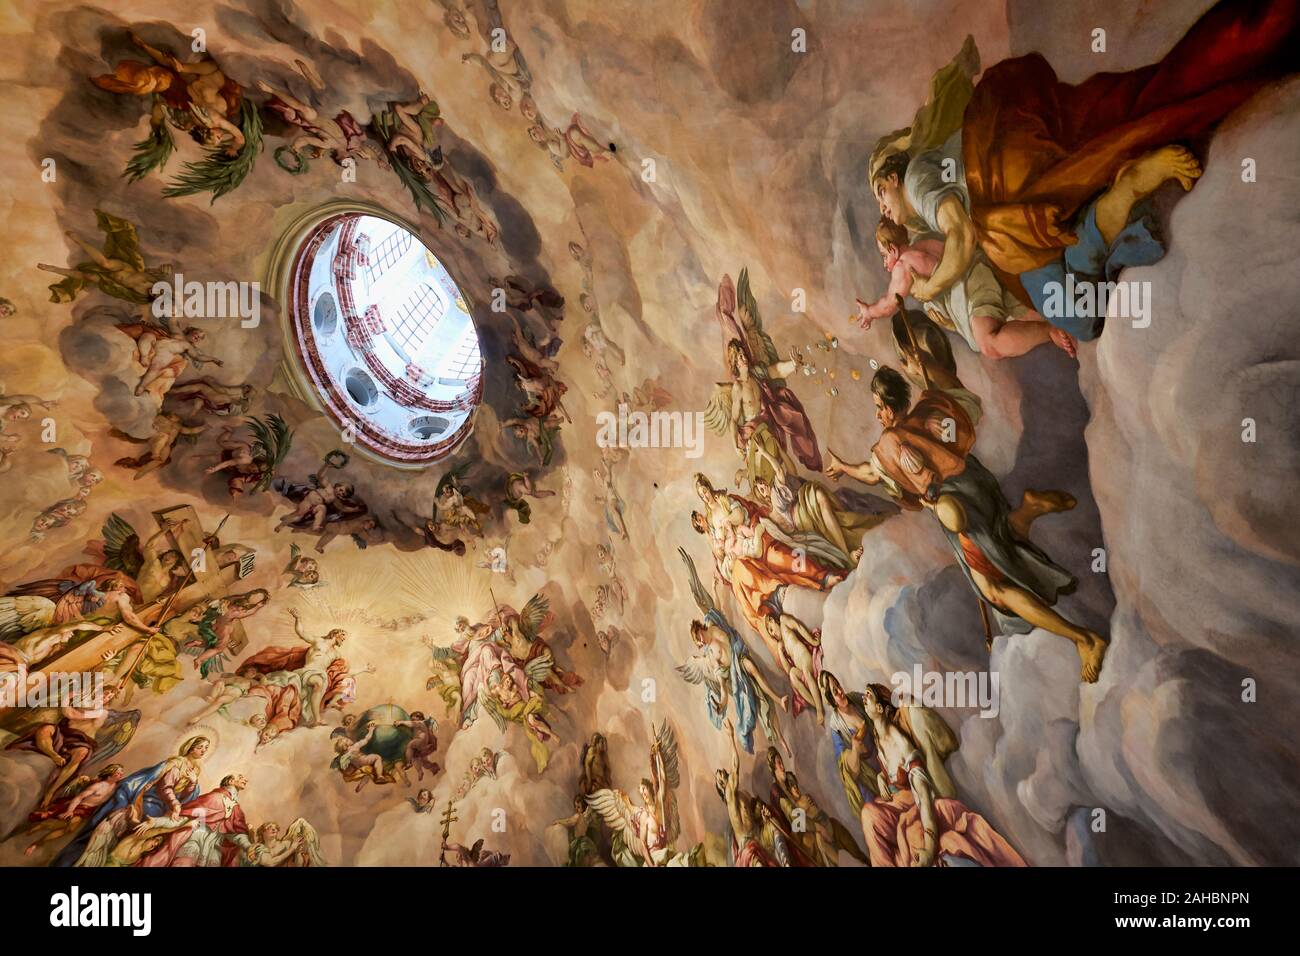 The frescoed ceiling of the Karlskirche St. Charles church. Vienna Austria Stock Photo